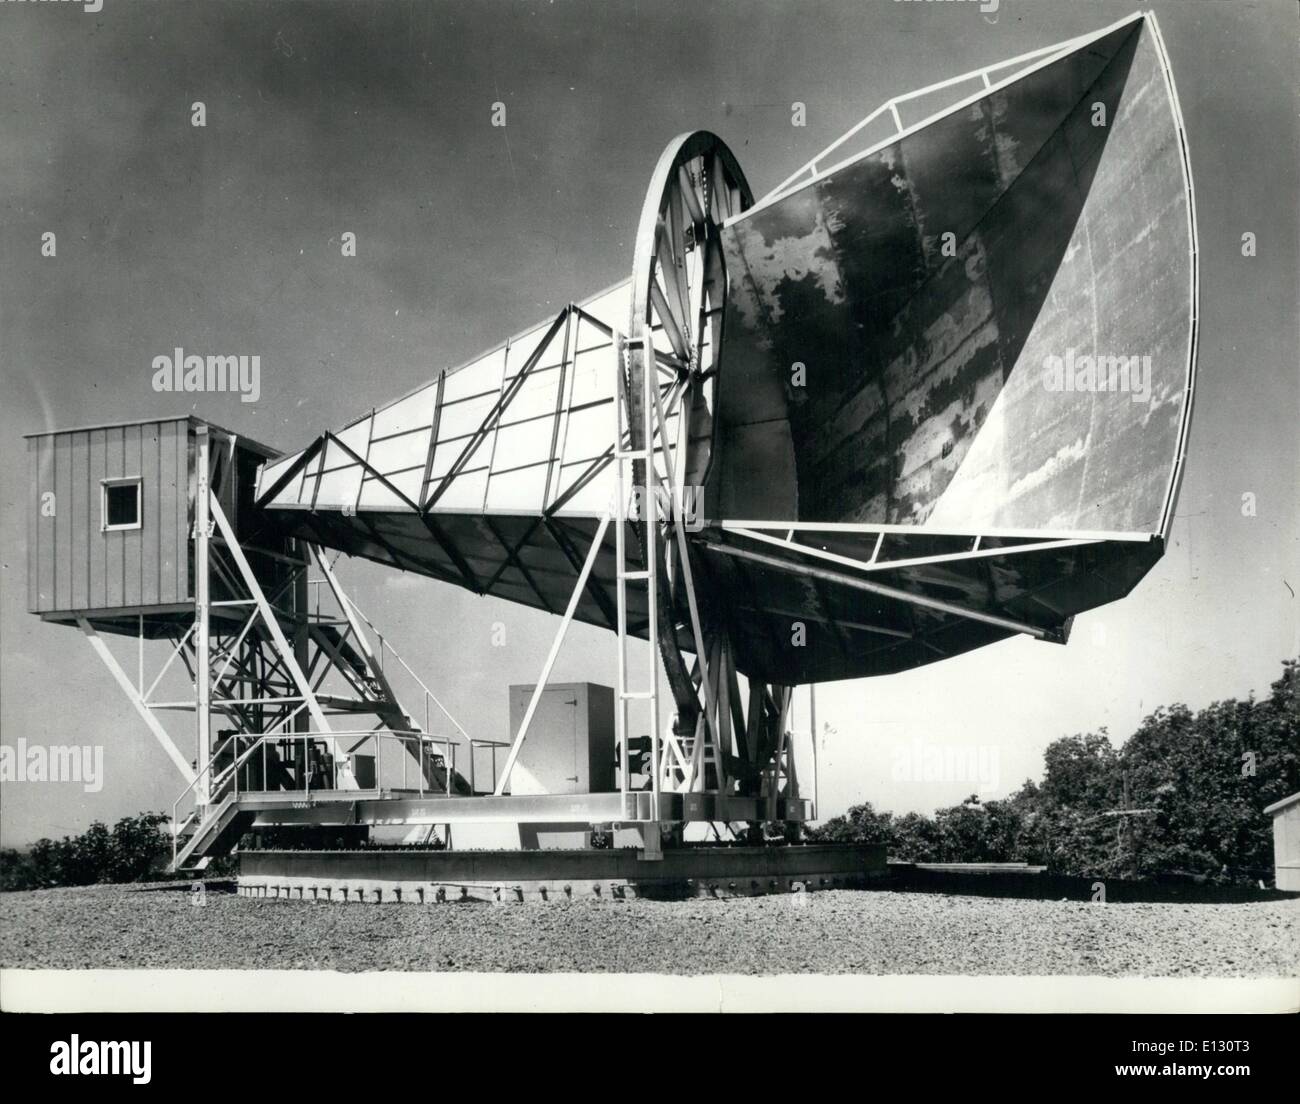 Feb. 26, 2012 - Giant ear trumpet for outer space.: This large ''ear trumpet'' is one of the world's most sensitive sound receivers. Built to capture sounds from outer space the 50-ft-long revolving antenna is located at the U.S. Bell Telephone System's space research laboratory at Holmdel (New Jersey). The box at the end of the trumpet houses a ruby maser amplifier refrigerated to 456 degrees below zero Fahrenheit. The receiver figures prominently in the Echo and Telstar satellite projects Stock Photo